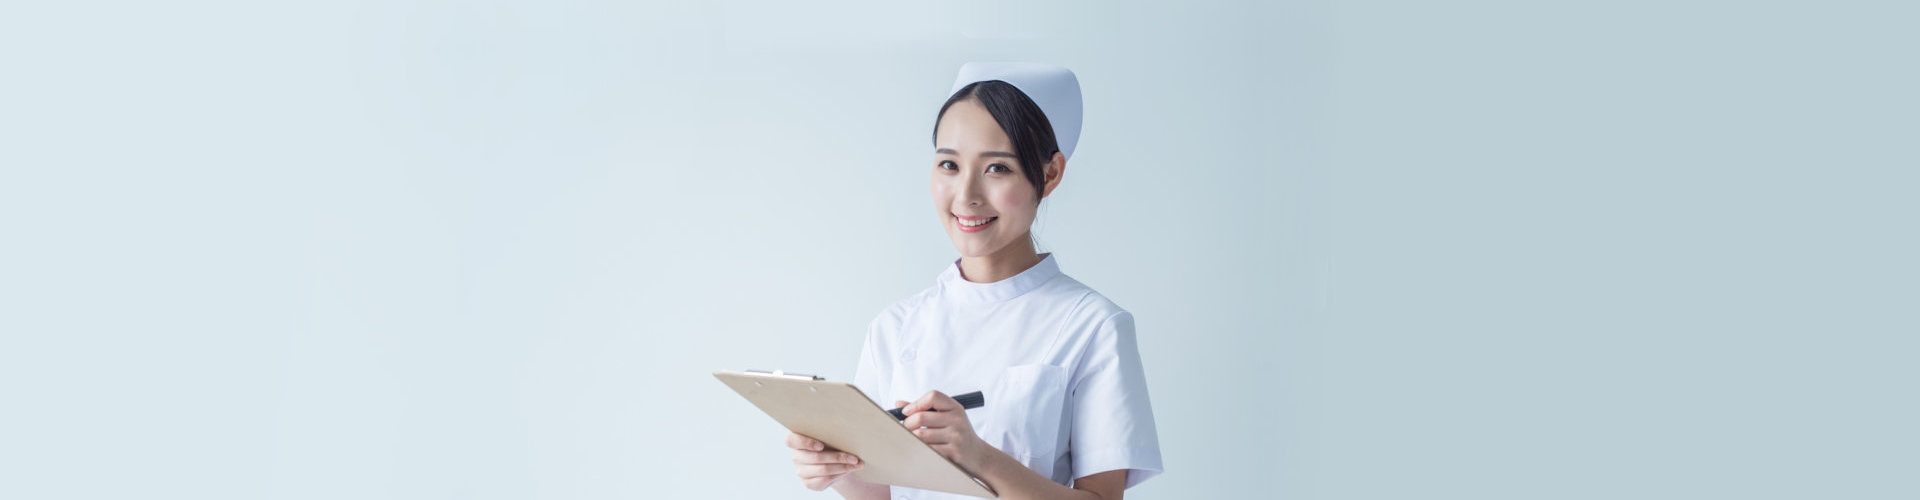 certified nurse holding a pen and checklist notebook